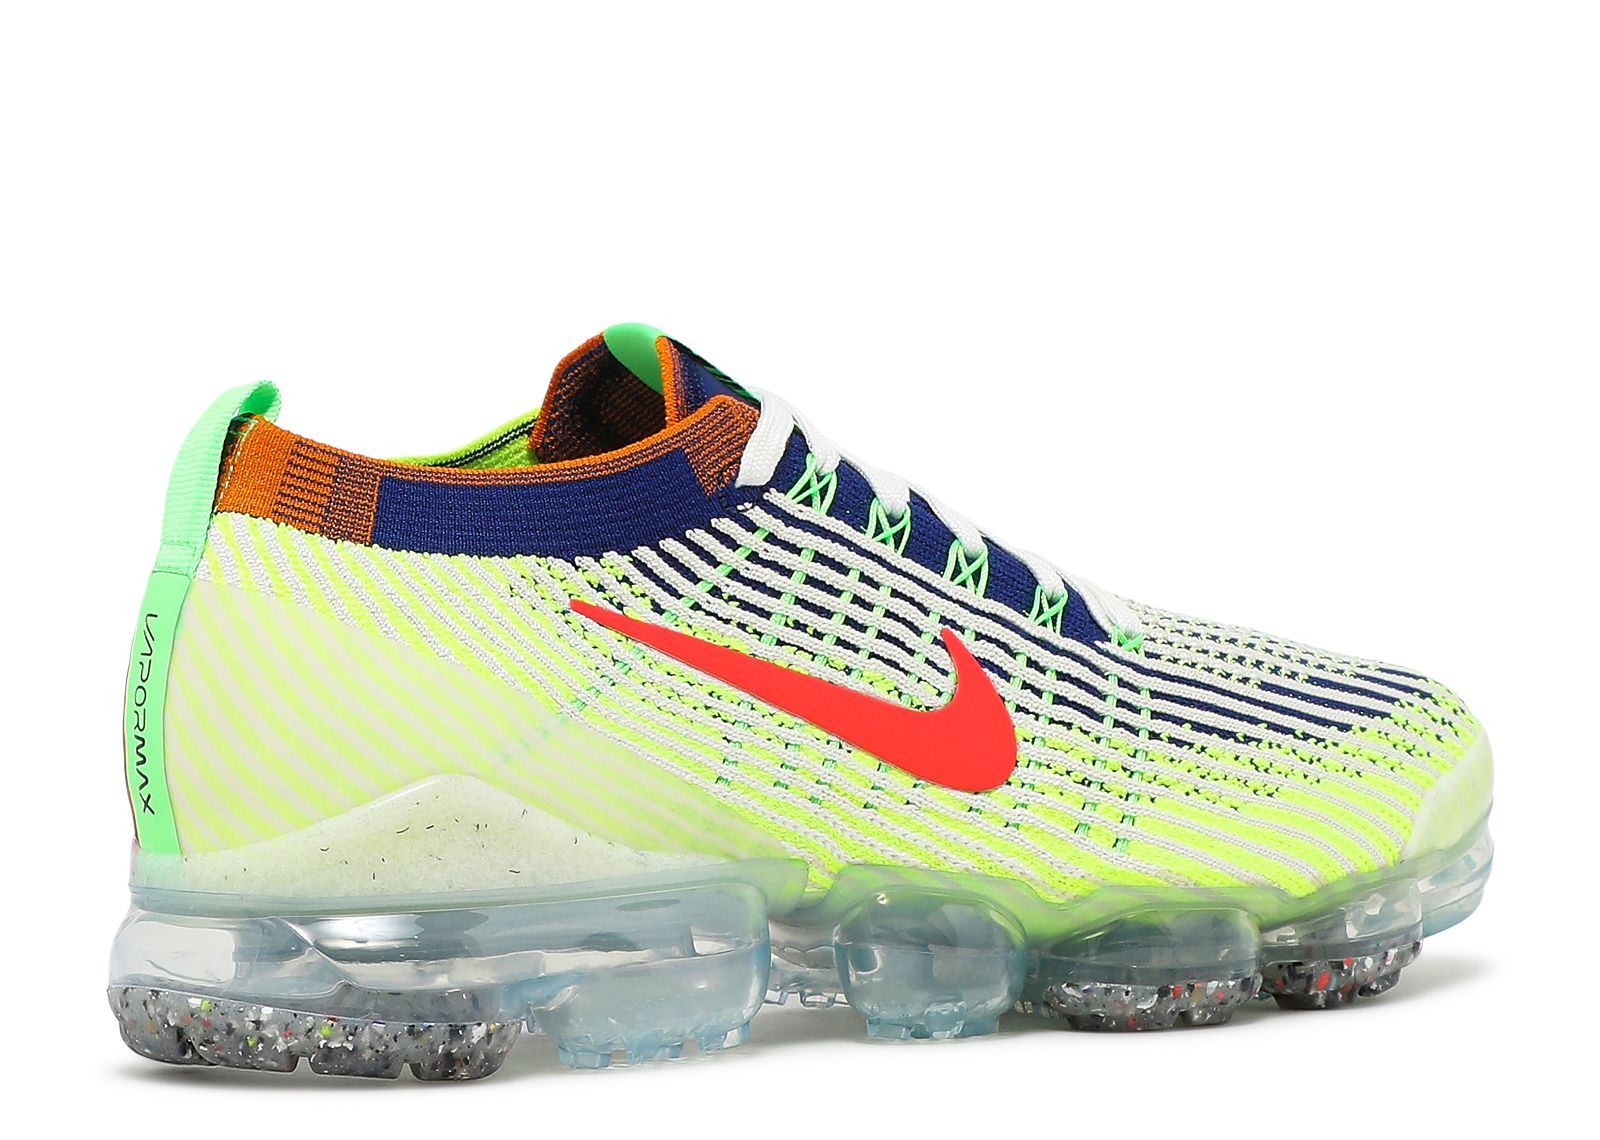 vapormax exeter edition release date